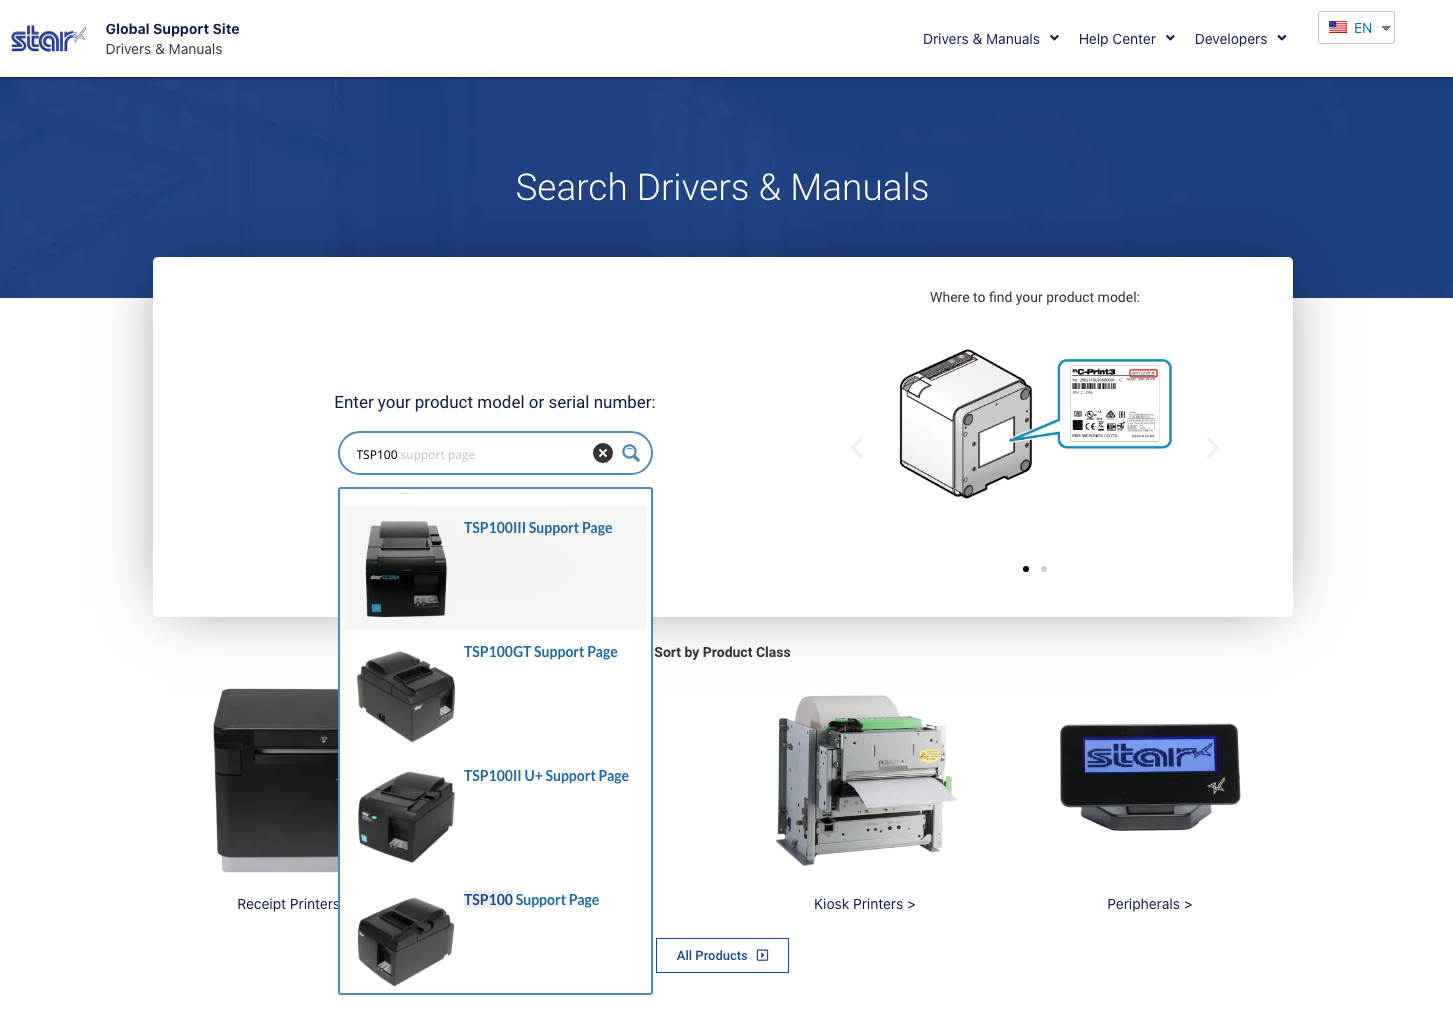 TSP100-Driver-Homepage.png